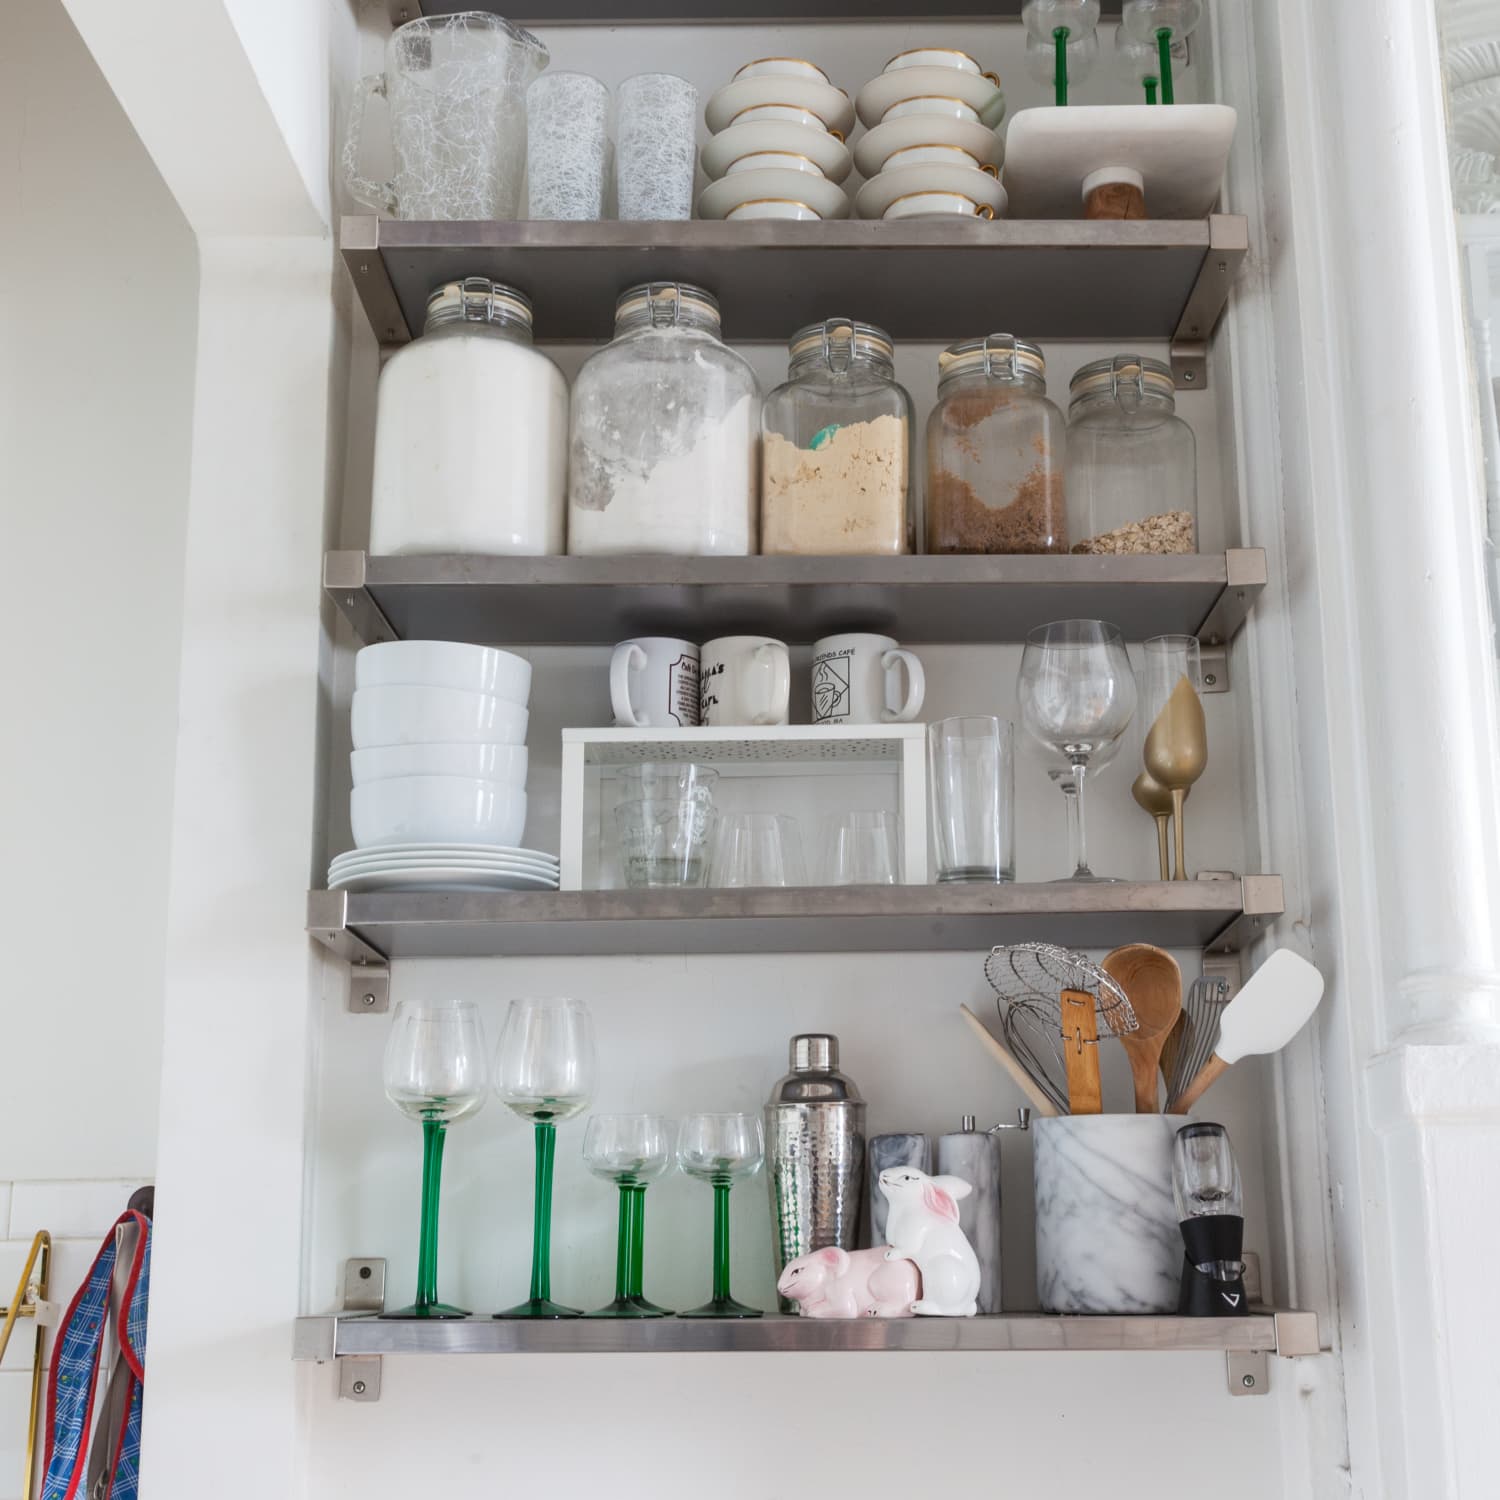 How to Use Wire Shelves and Baskets to Organize Kitchen Cabinets